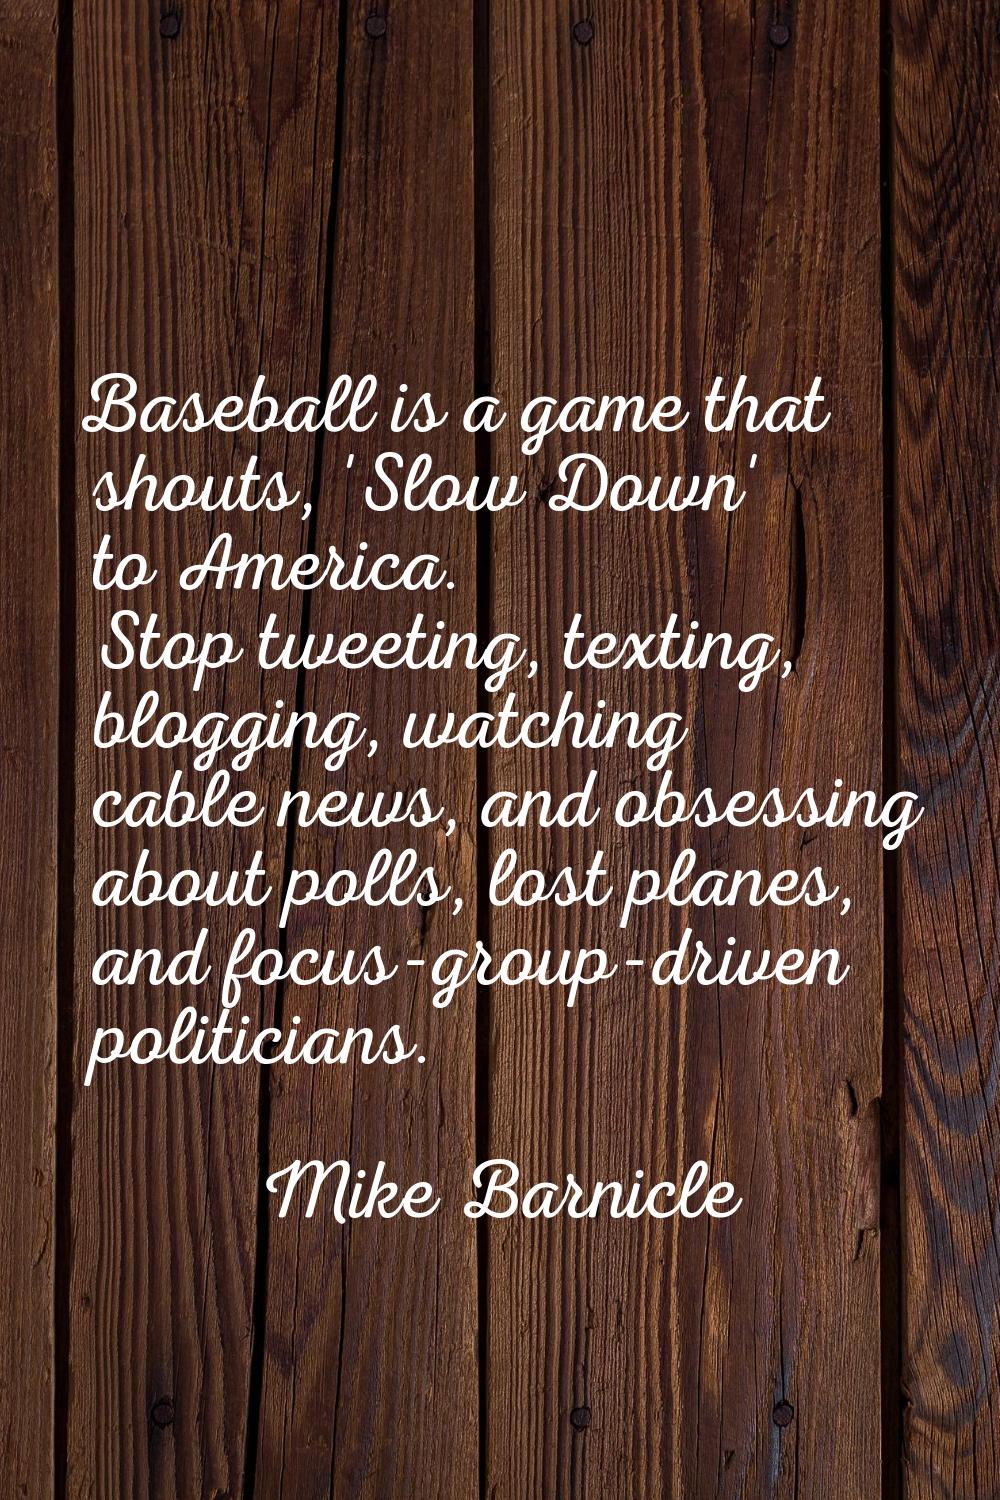 Baseball is a game that shouts, 'Slow Down' to America. Stop tweeting, texting, blogging, watching 